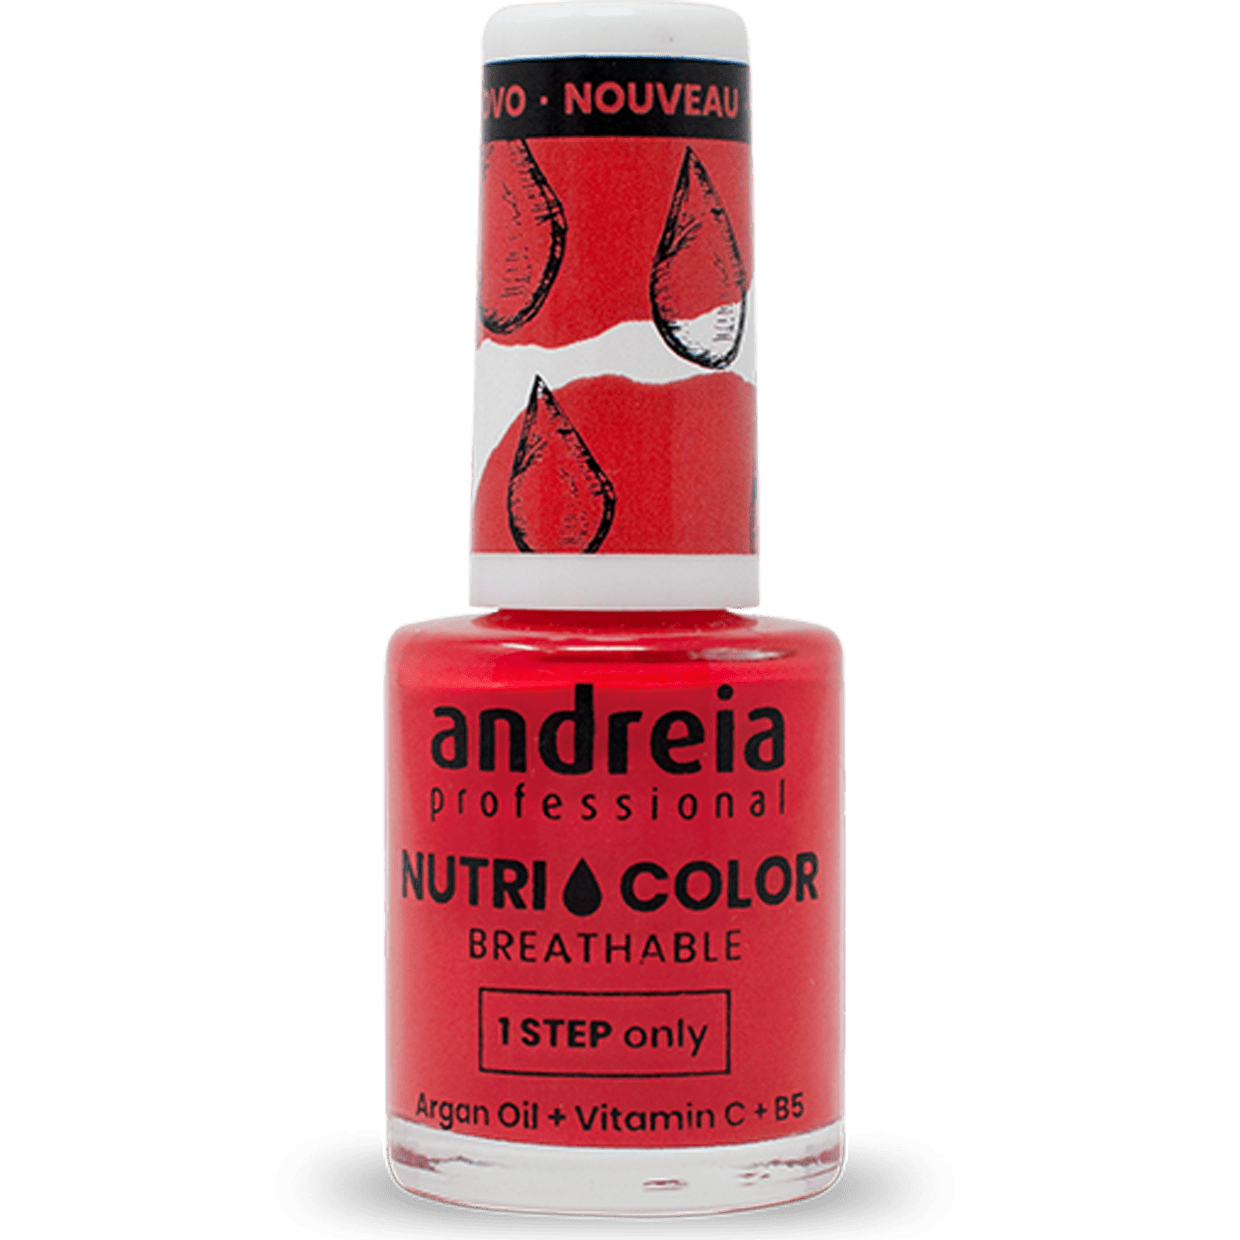 Andreia Professional NutriColor 9Free N16 10.5ml